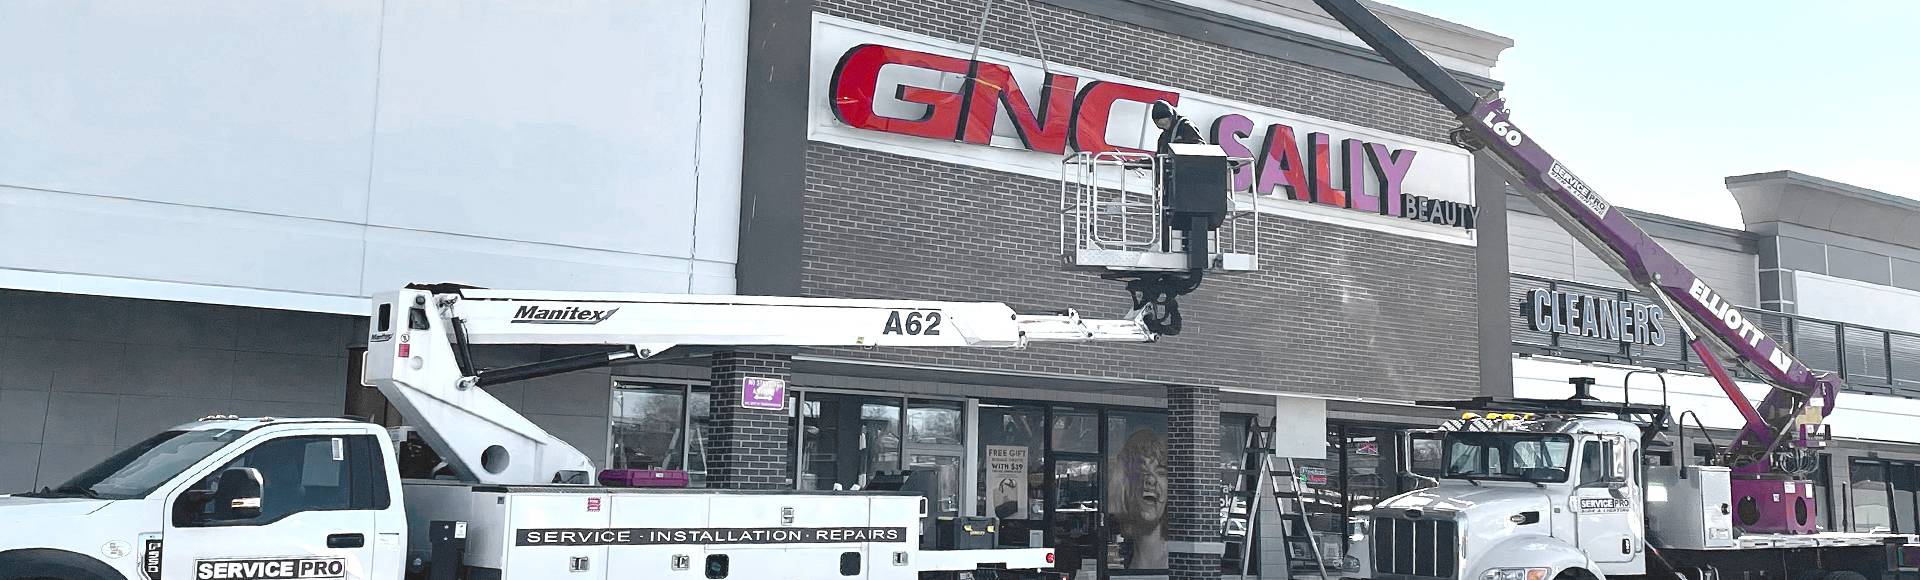 Leading Provider of sign and awning installation for NJ, Eastern PA and NYC Businesses 